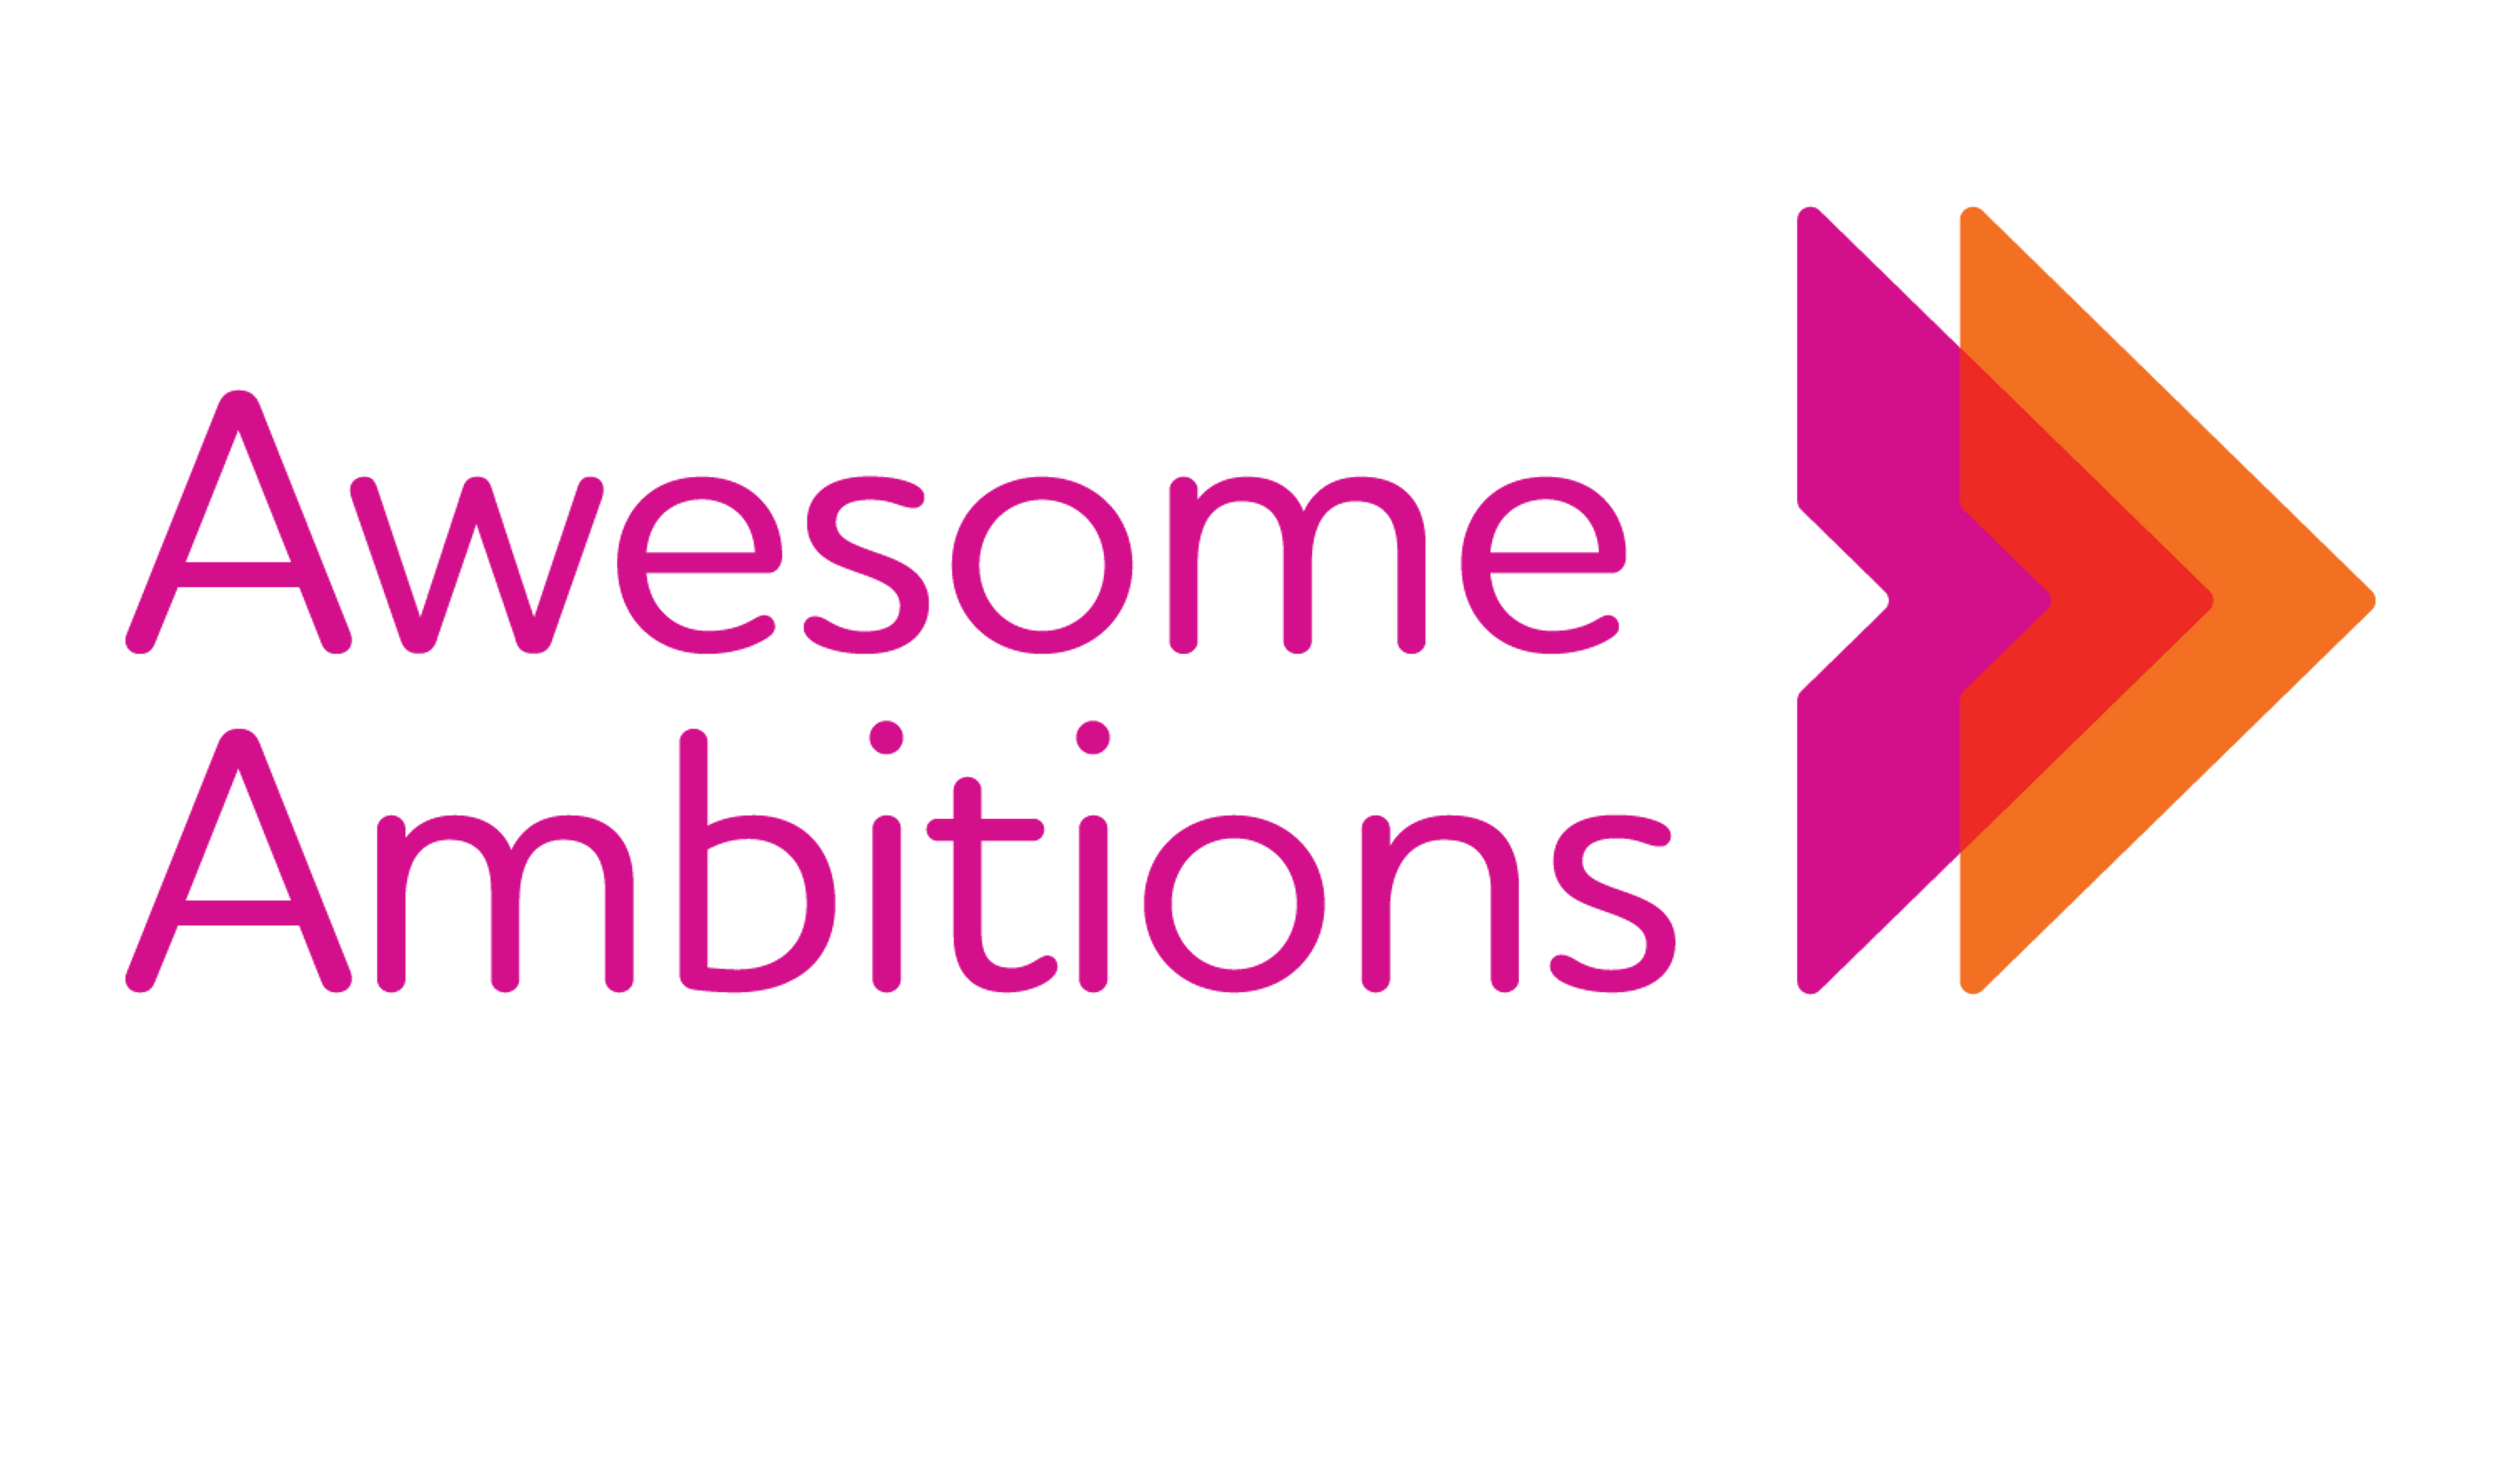 Awesome Ambitions logo